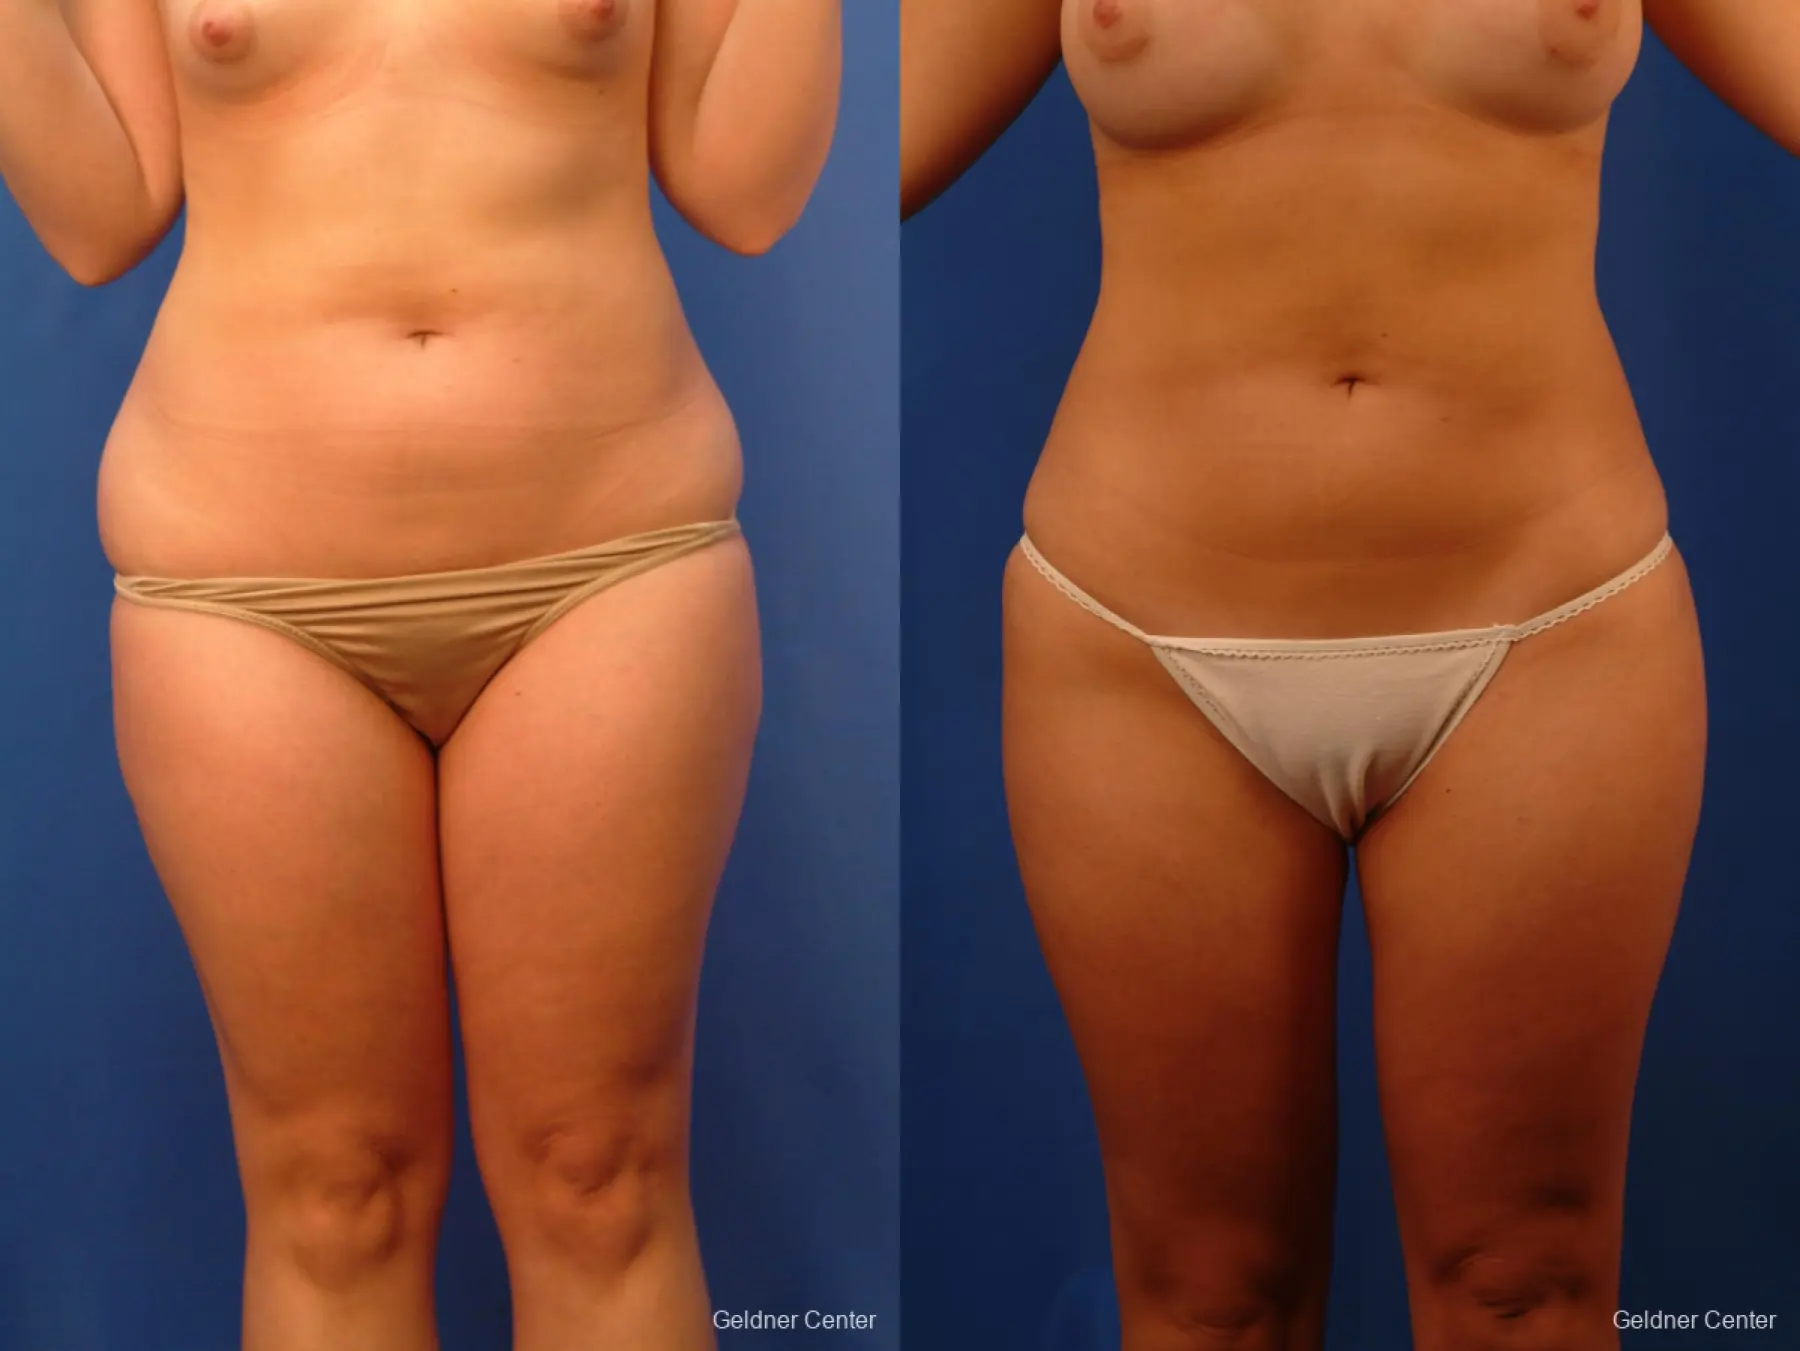 Vaser lipo patient 2516 before and after photos - Before and After